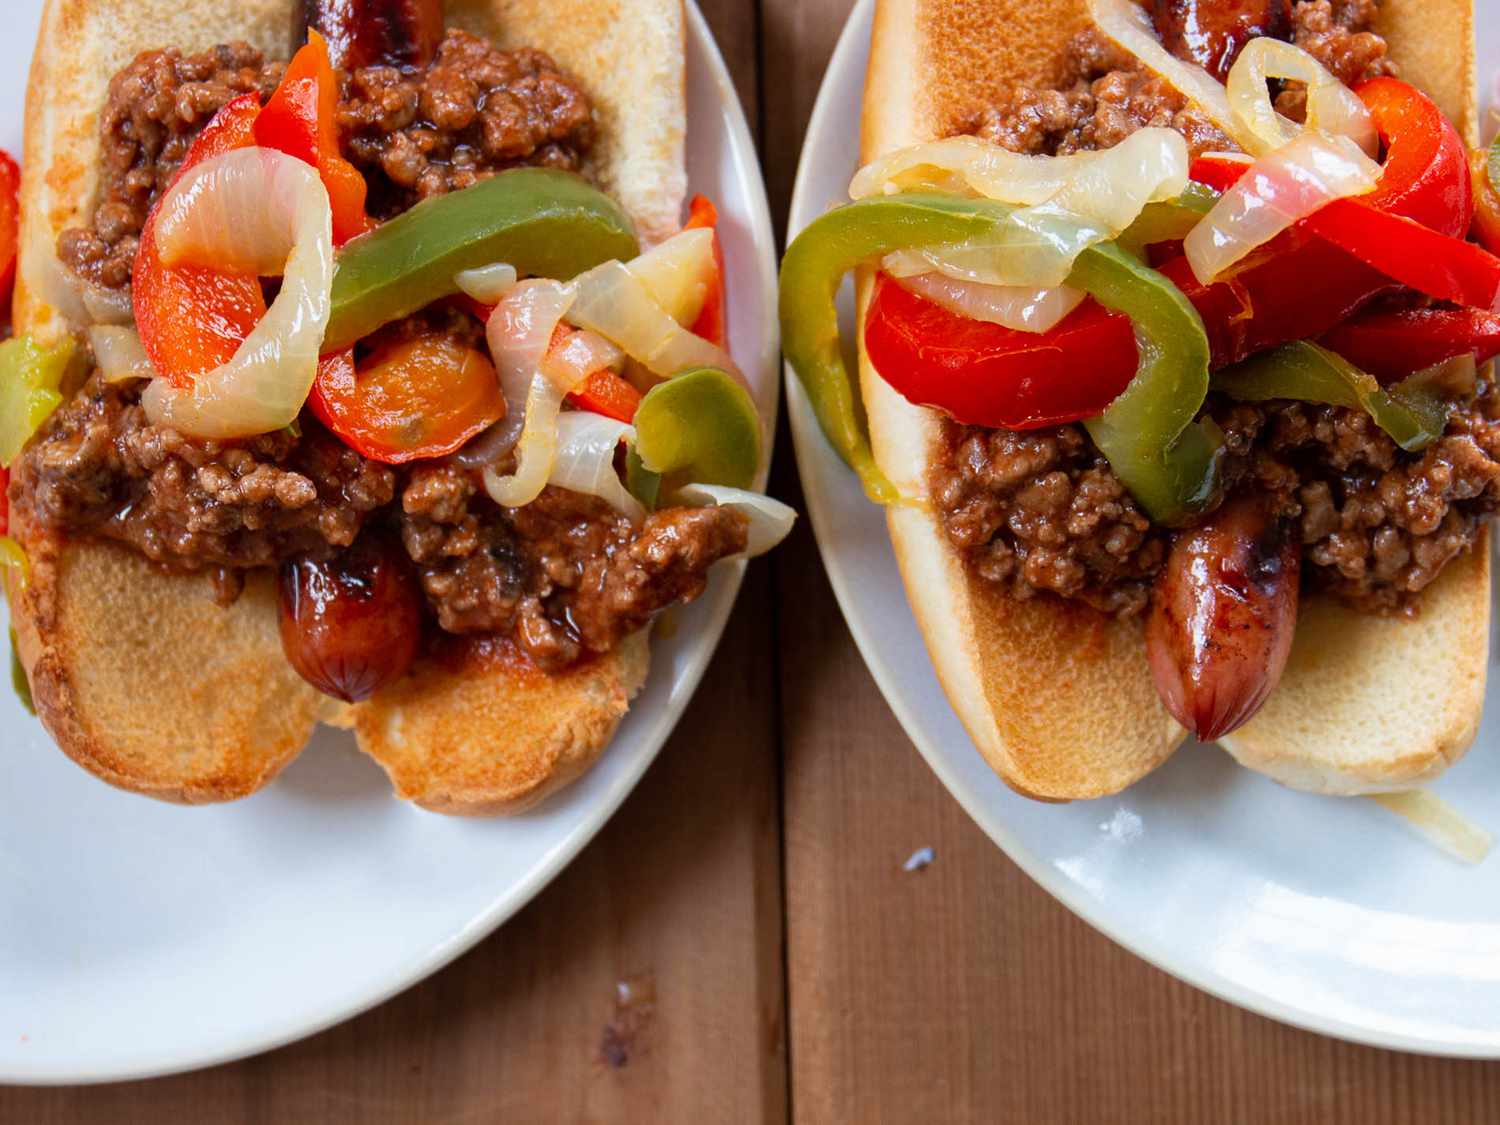 close up view of hot dogs with chili, peppers and onions on white plates